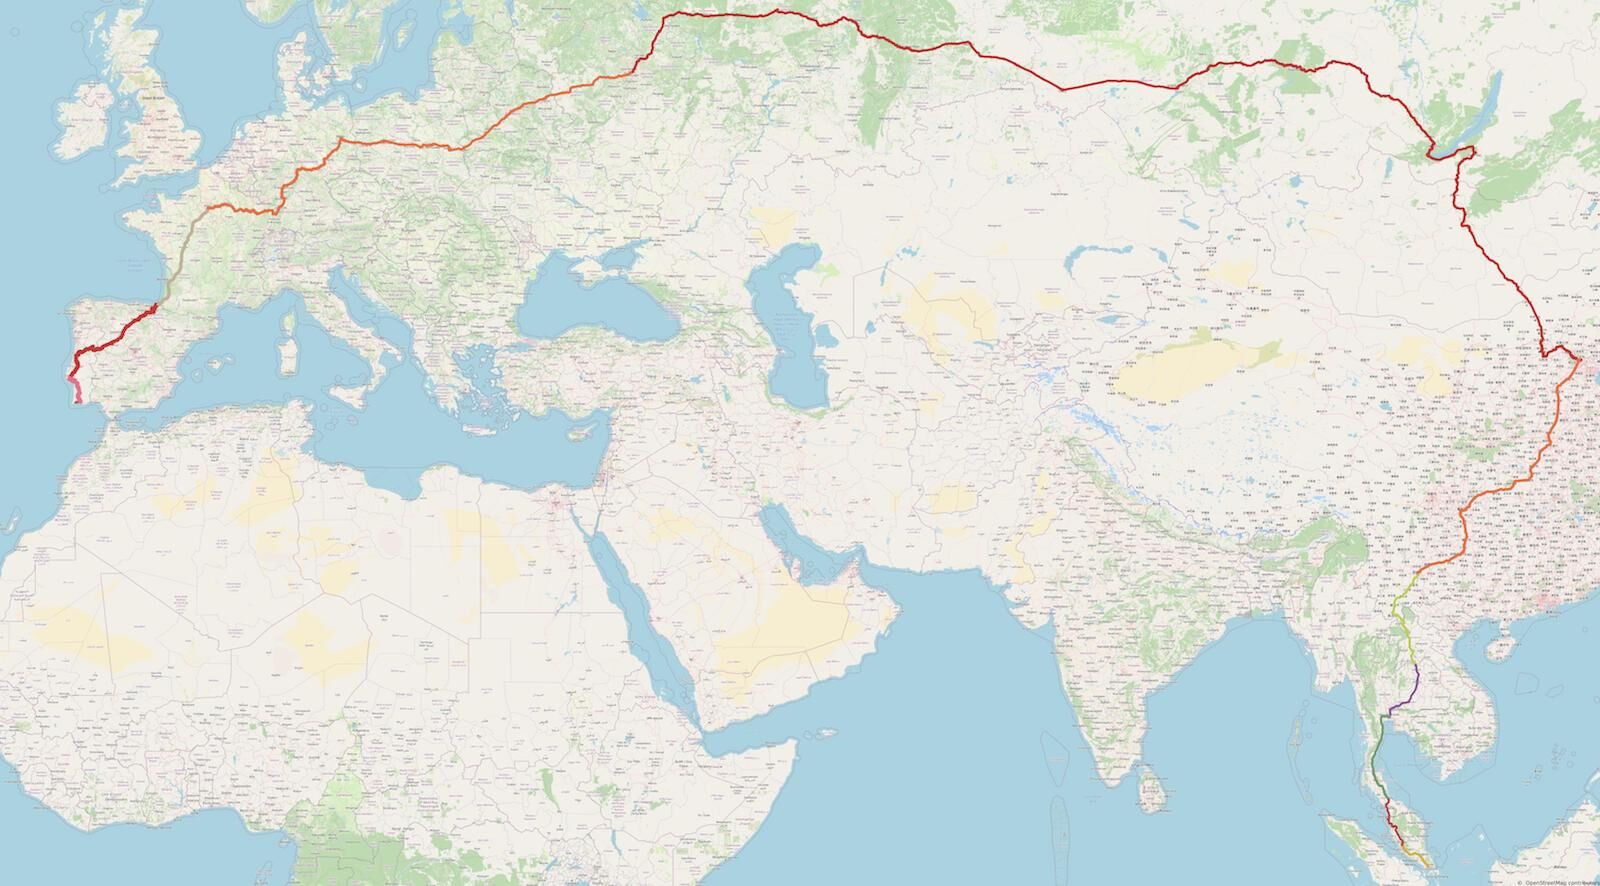 The world's longest train route, proposed by user and map fan htGoSEVe